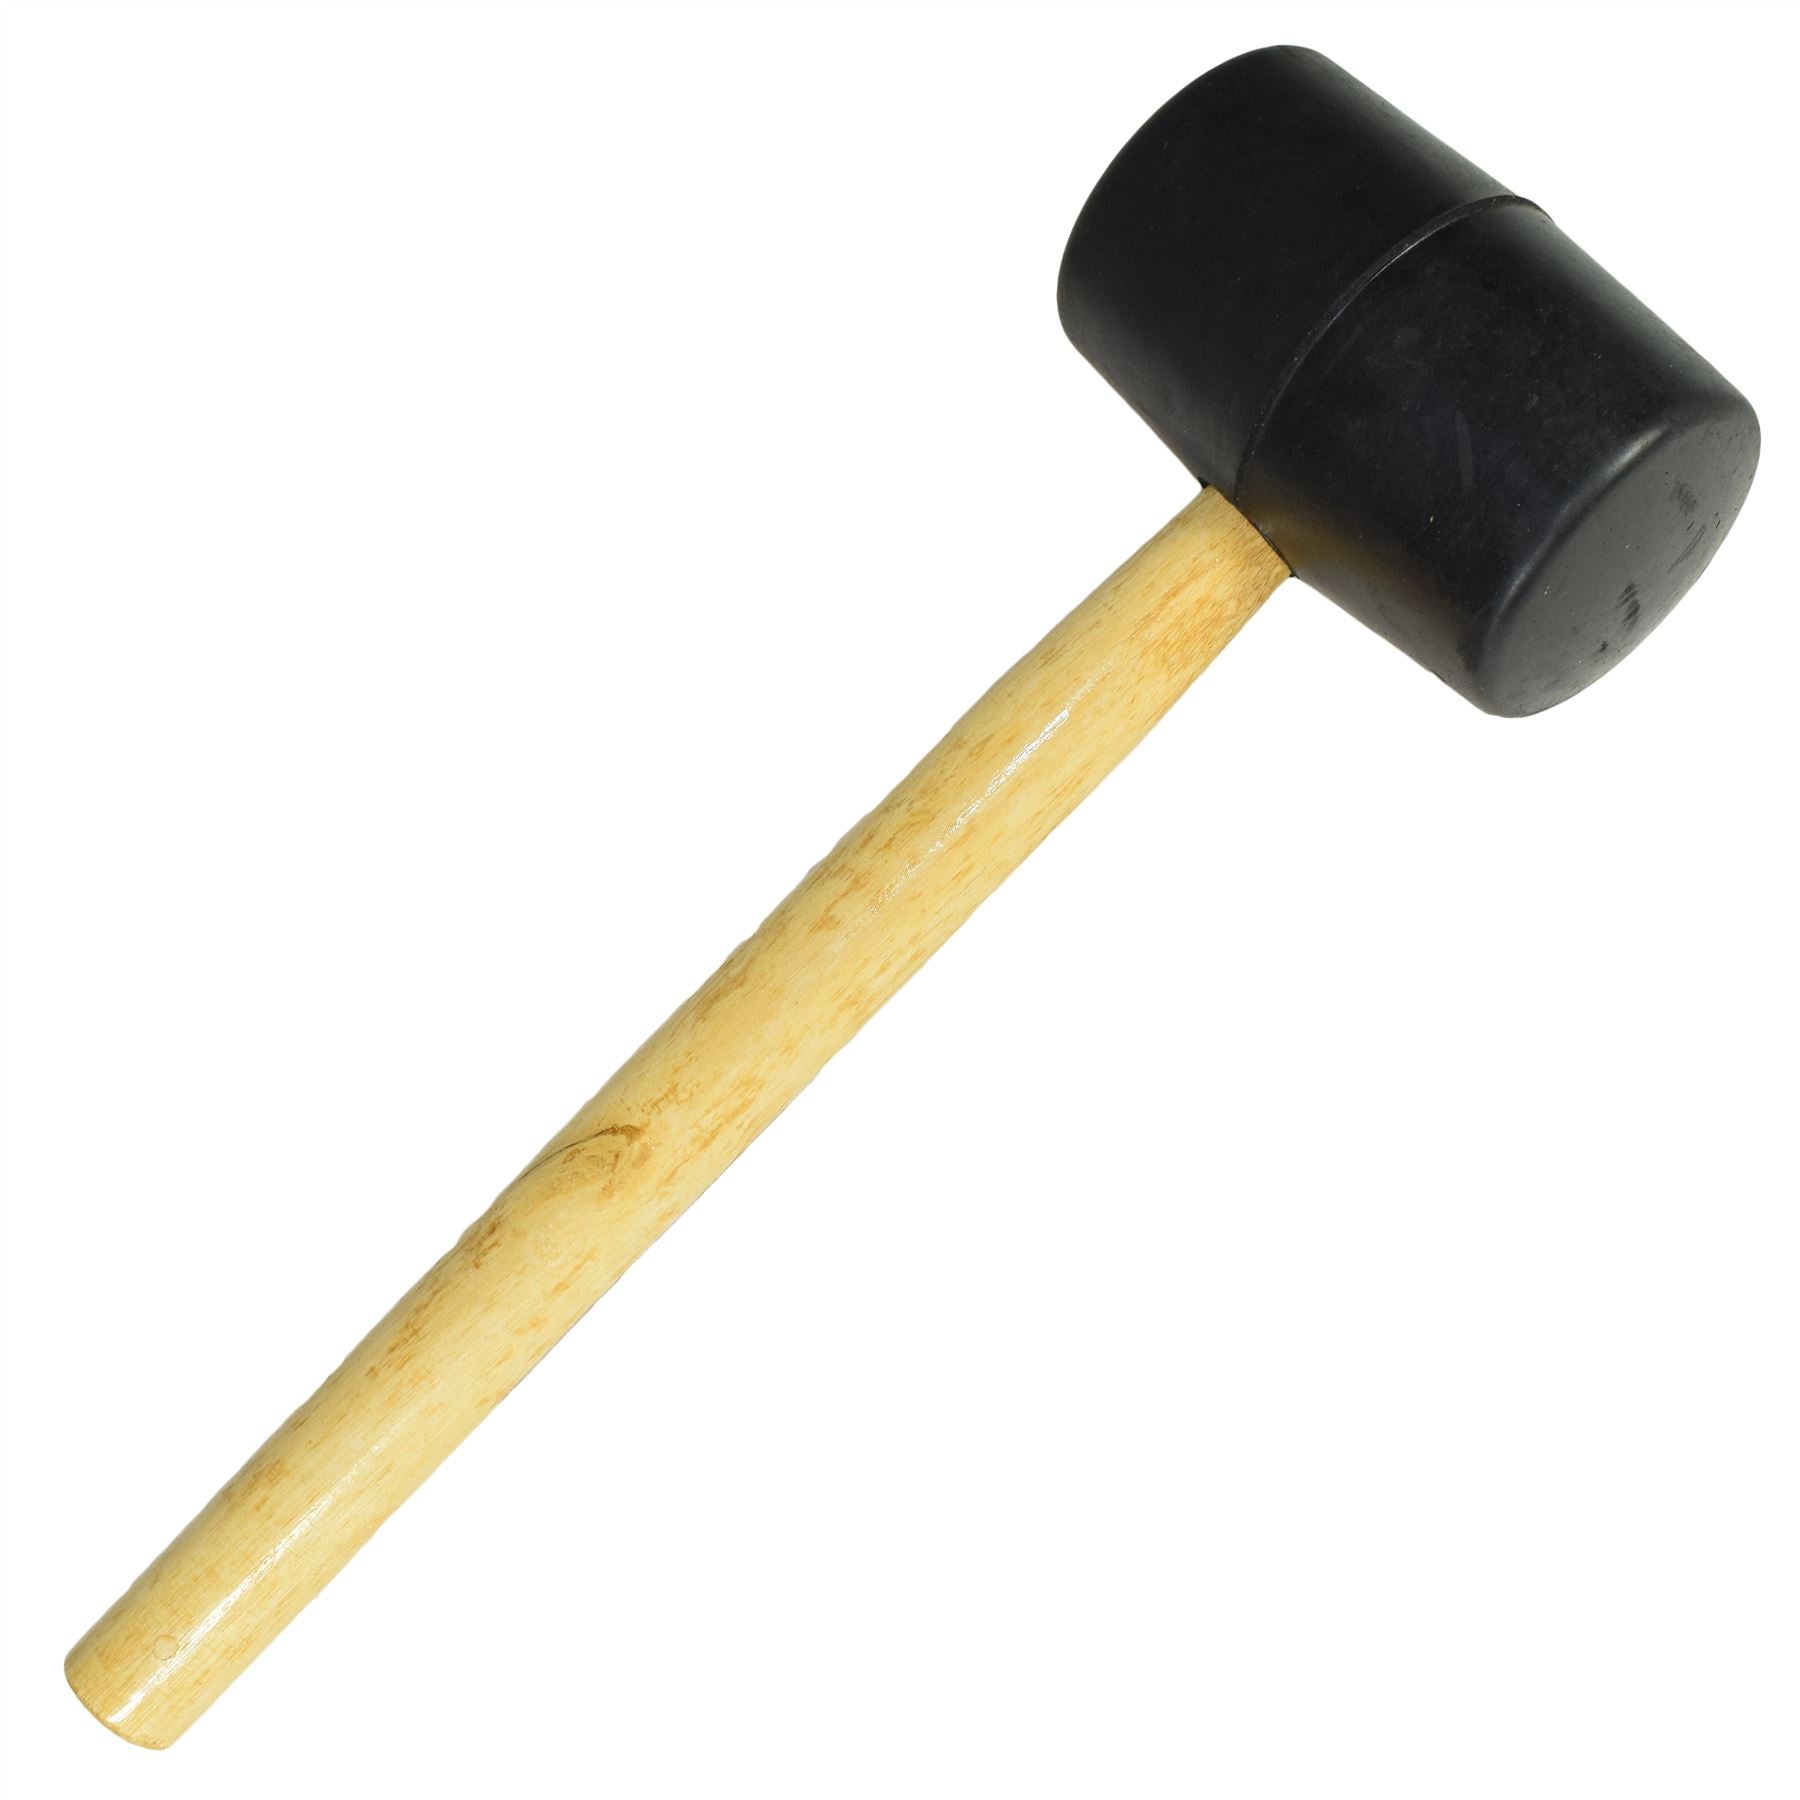 16oz Black Rubber Mallet Non Marking With Wooden Handle Shaft Tent Pegs